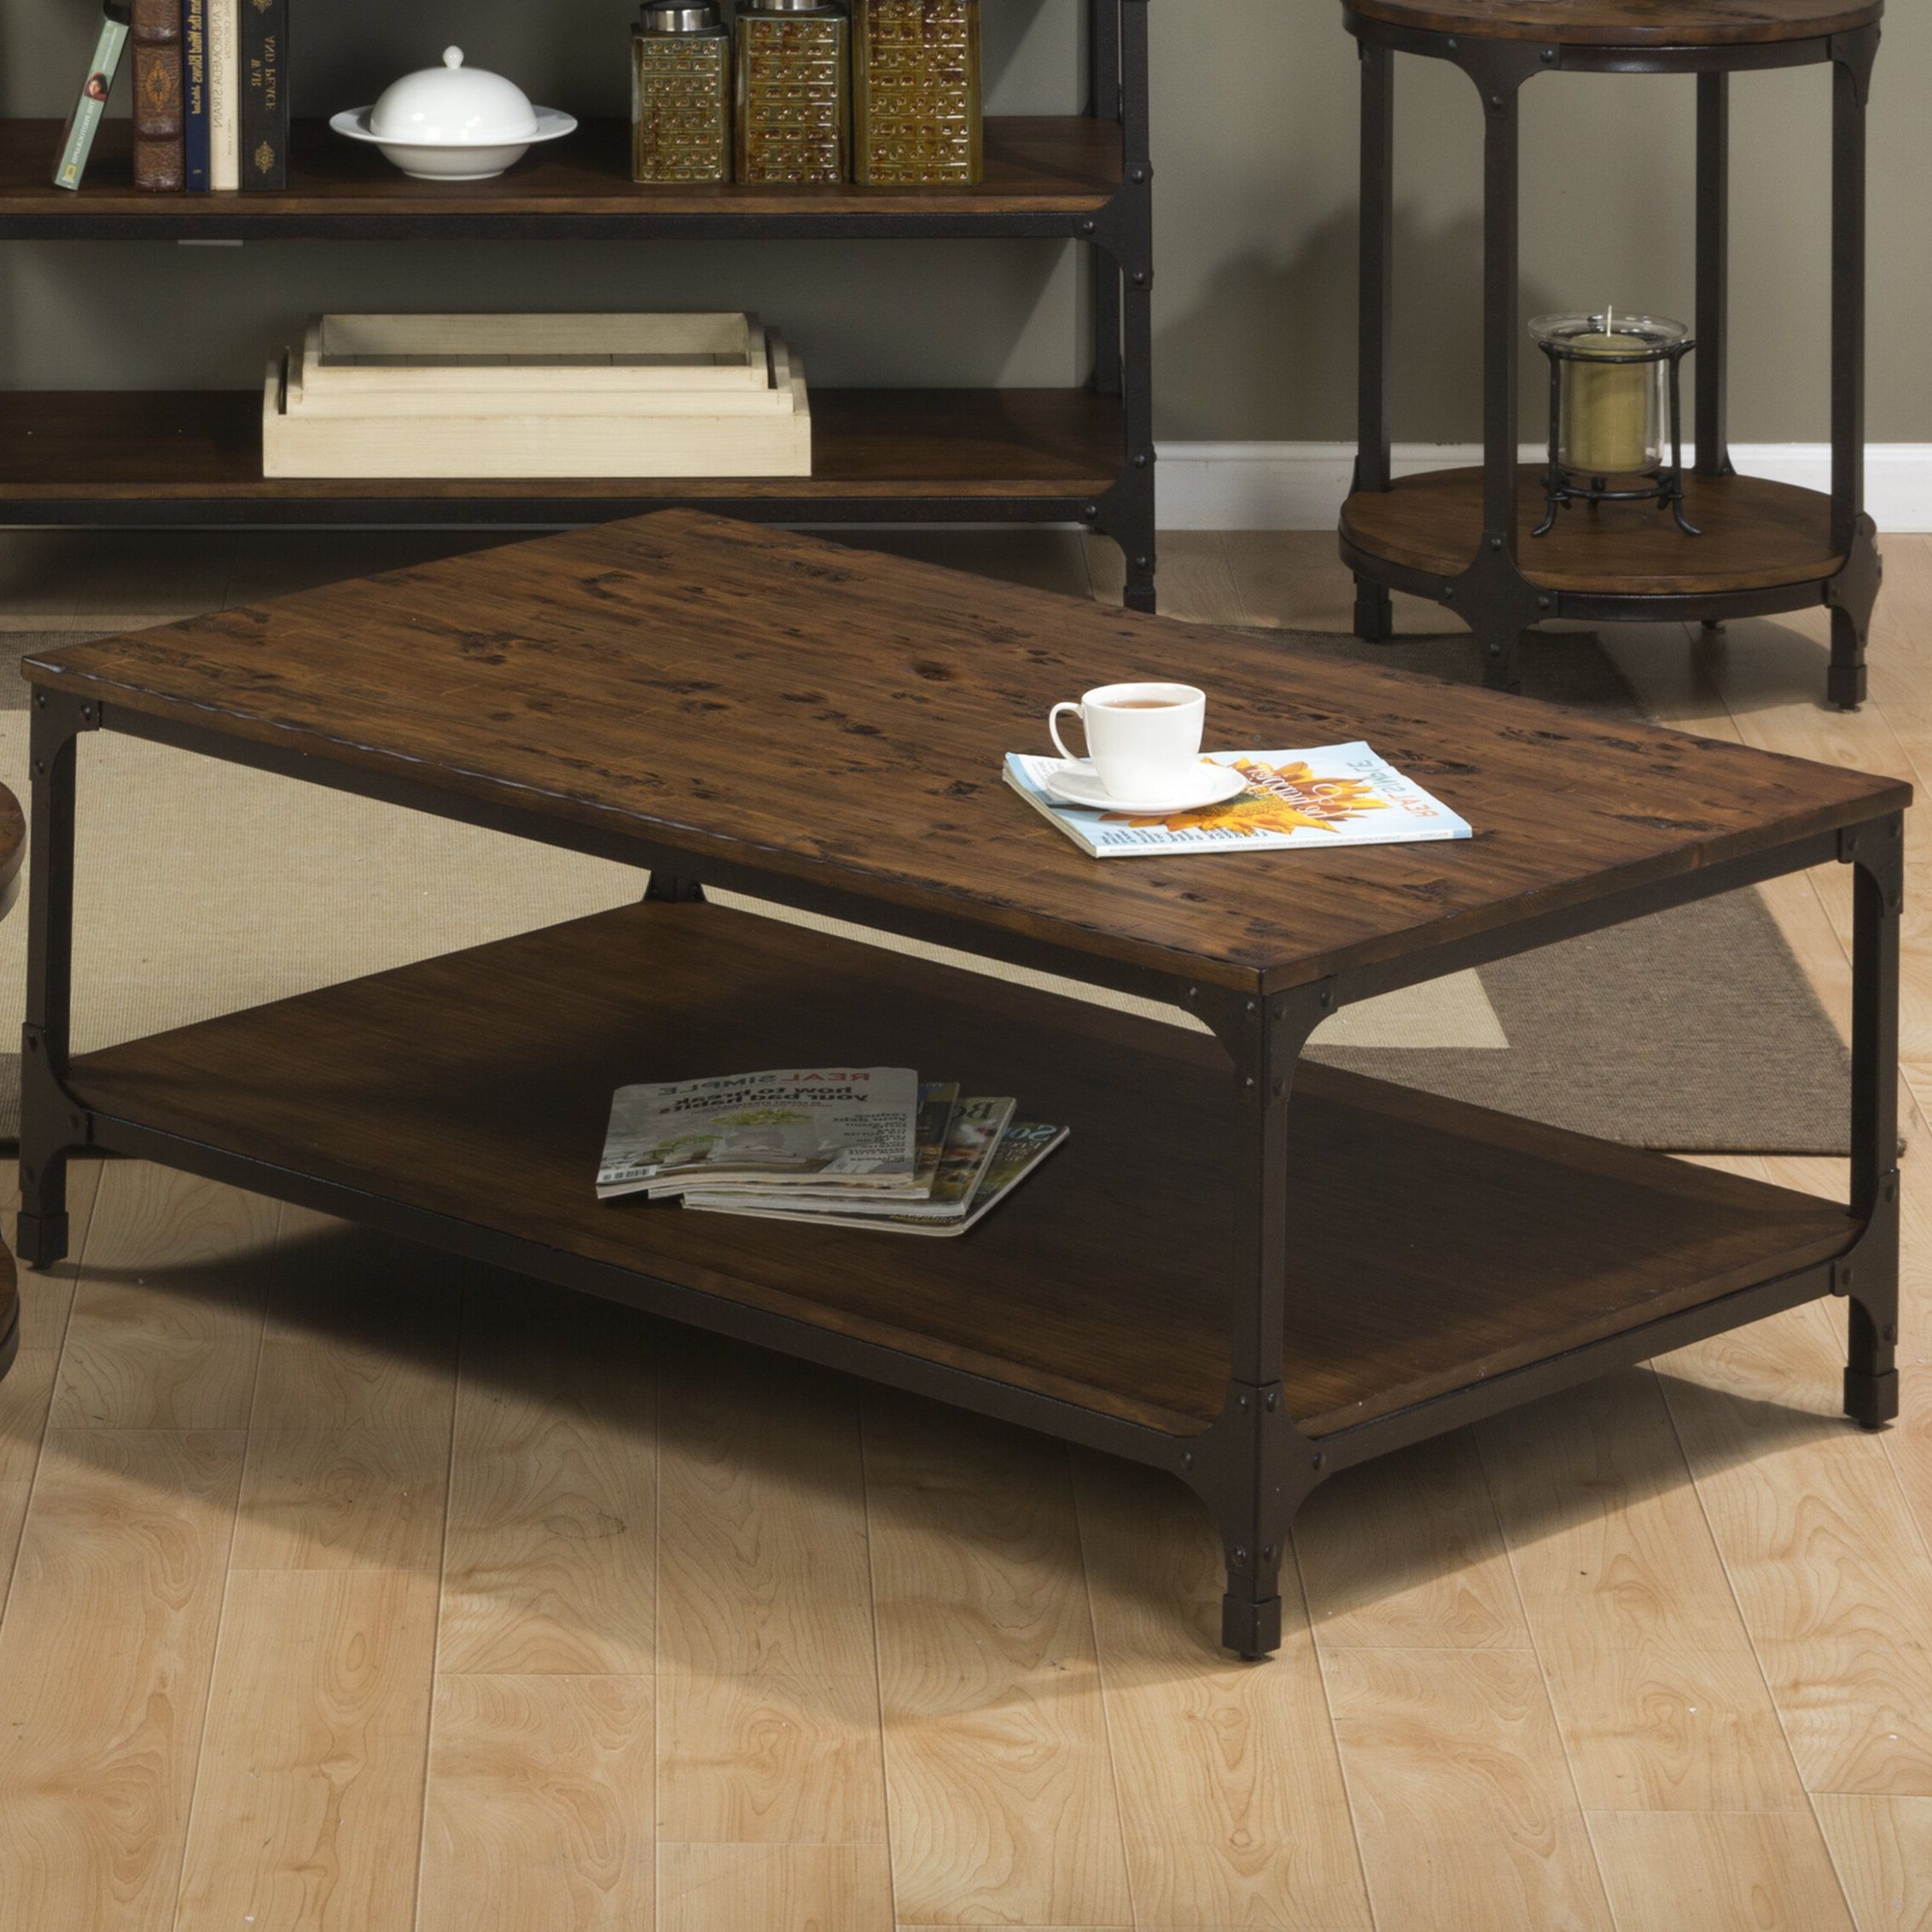 Wayfair With Regard To Most Popular Modern Farmhouse Coffee Tables (View 12 of 15)